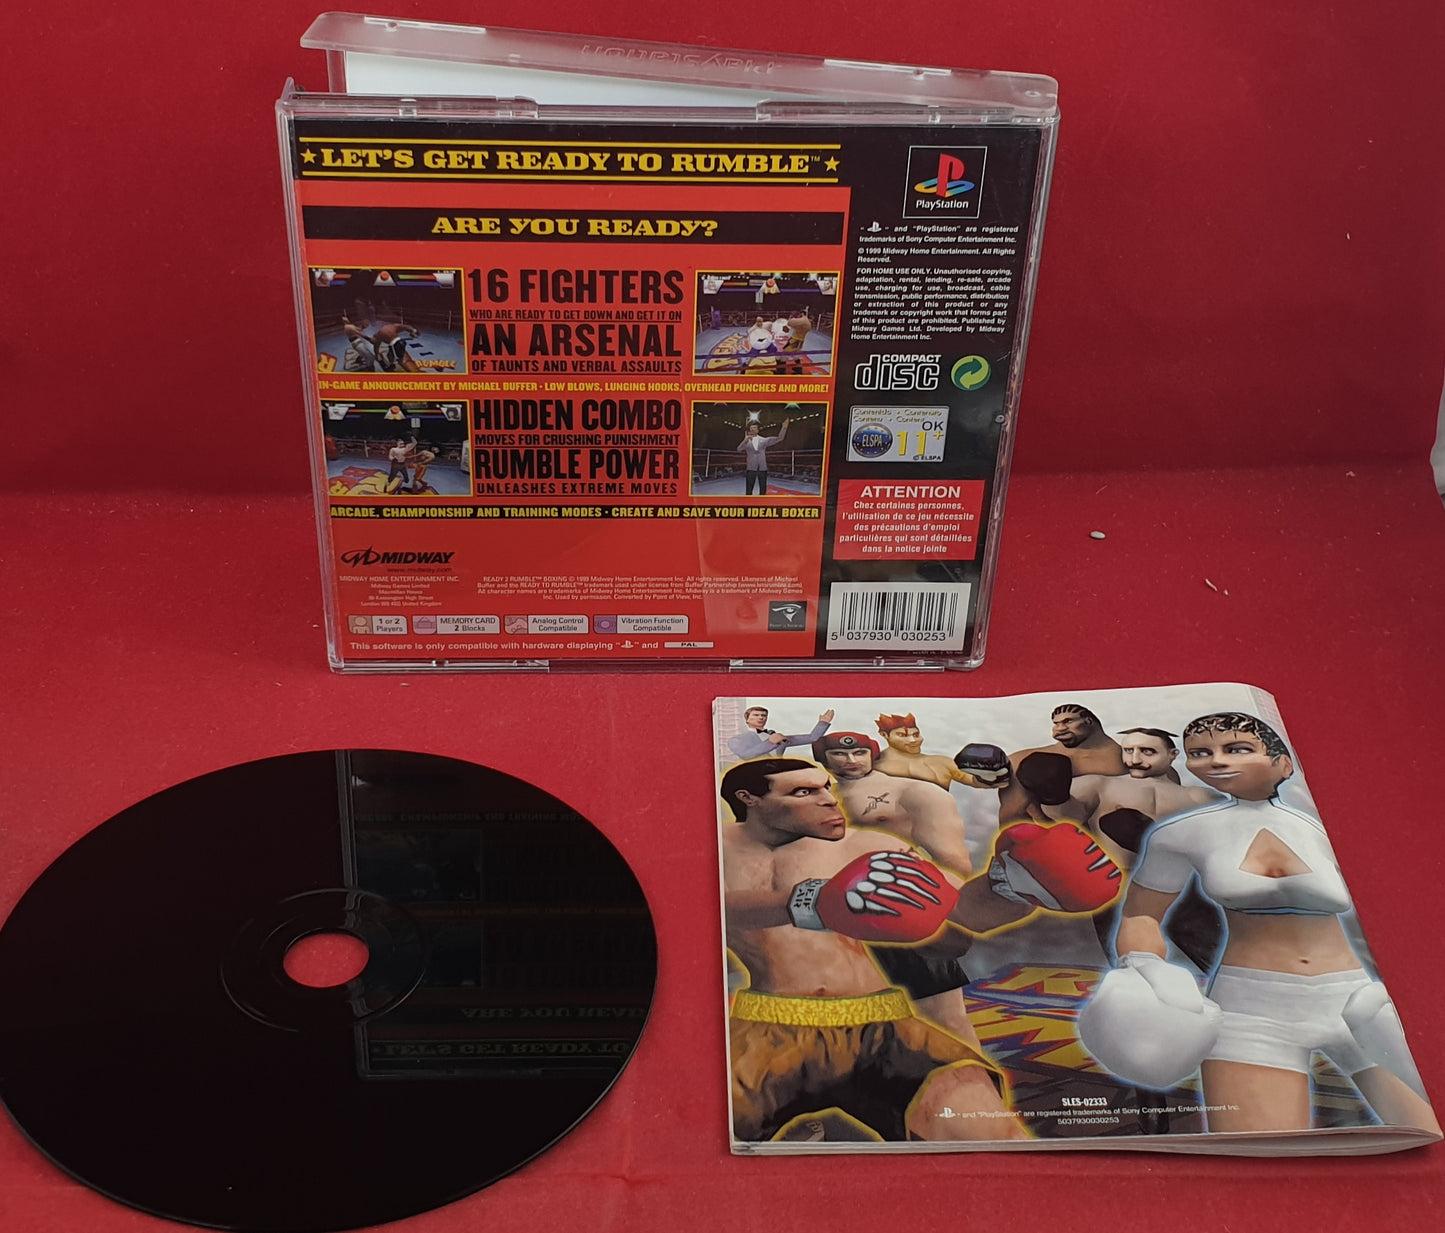 Ready 2 Rumble Boxing Classics Sony Playstation 1 (PS1) Game